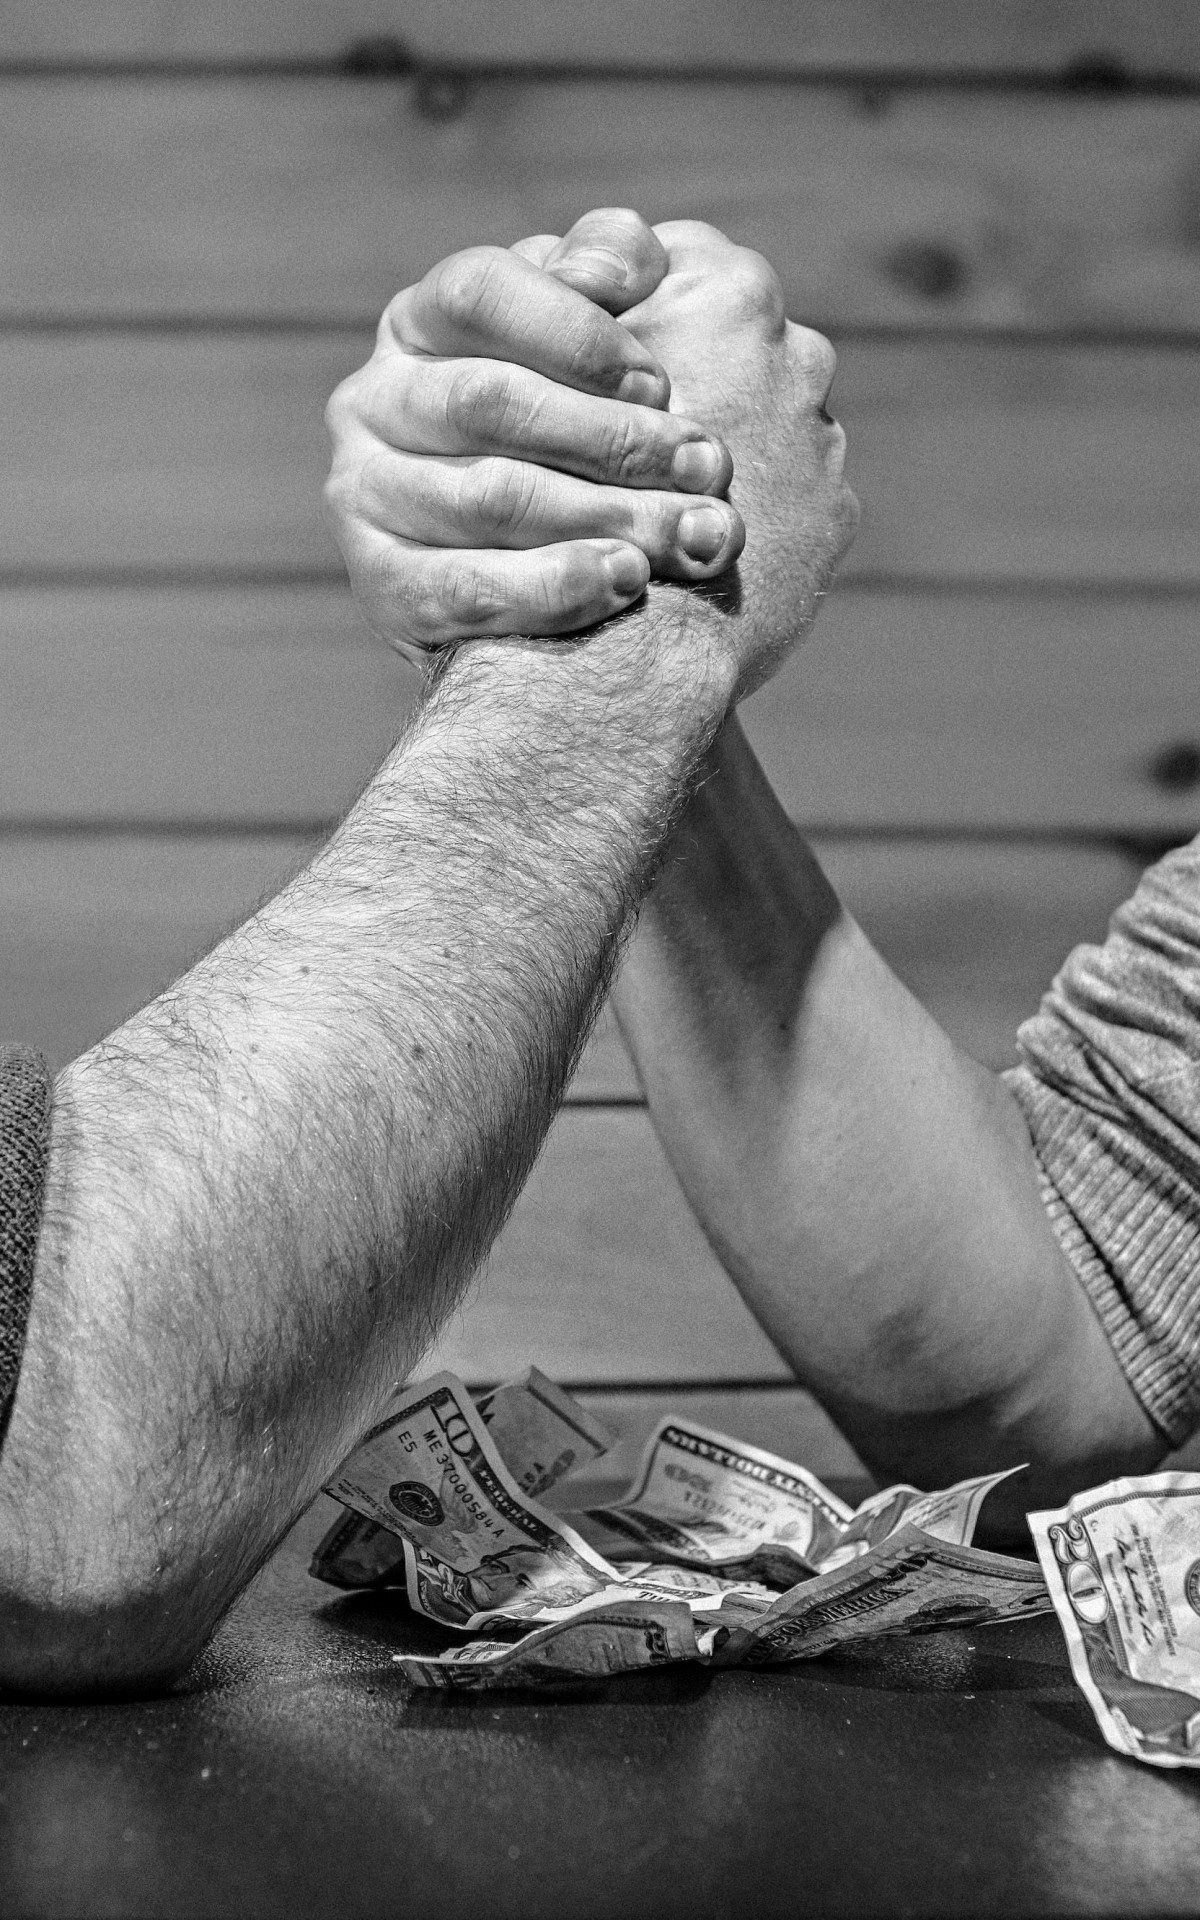 Arm Wrestling Wallpaper for Amazon Kindle Fire HDX